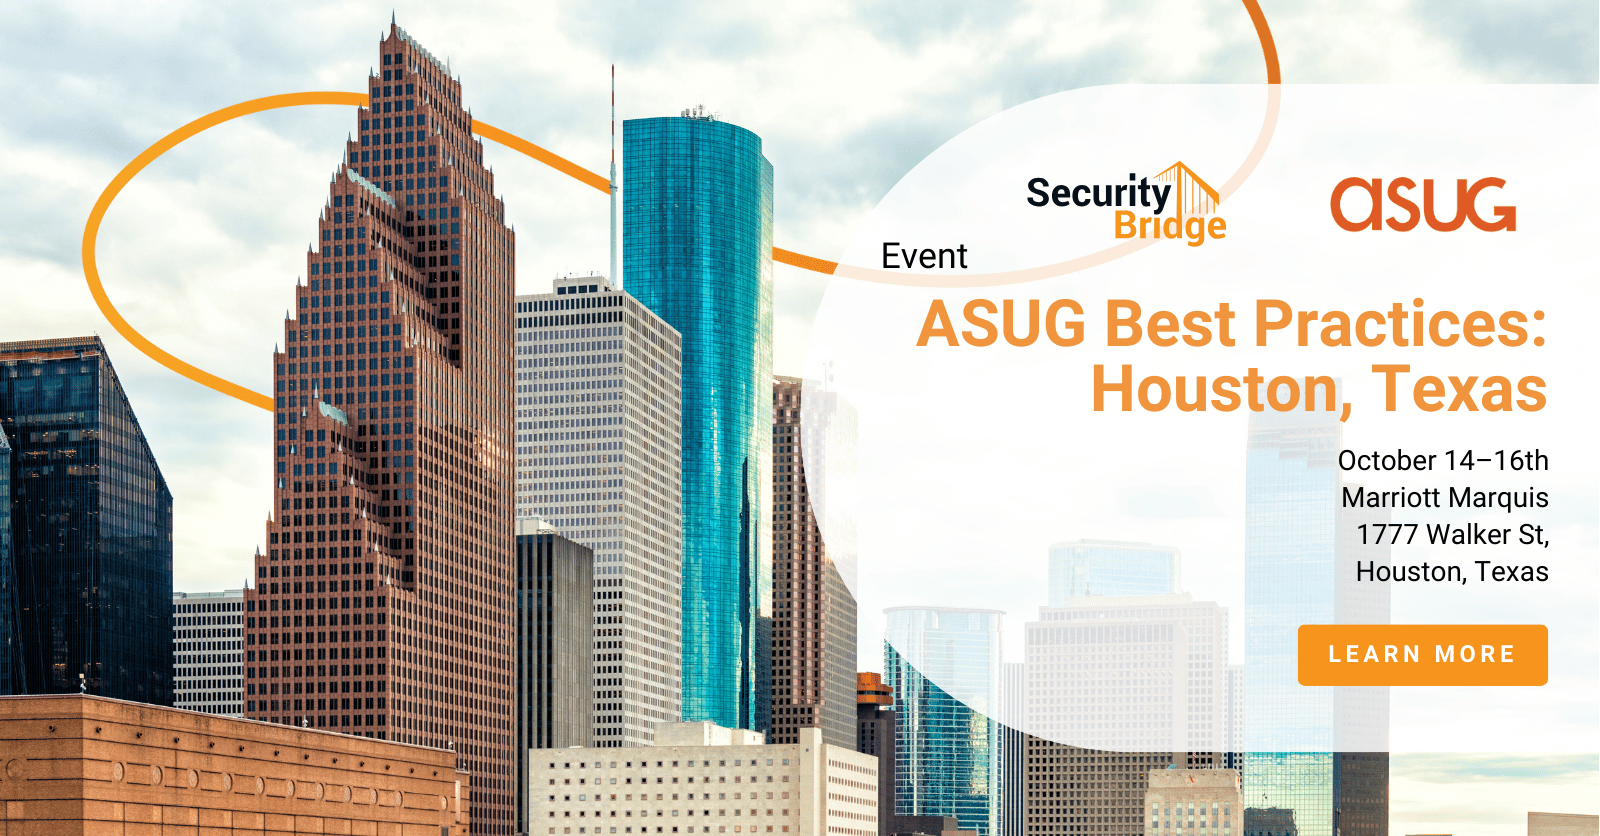 ASUG Best Practices in Houston